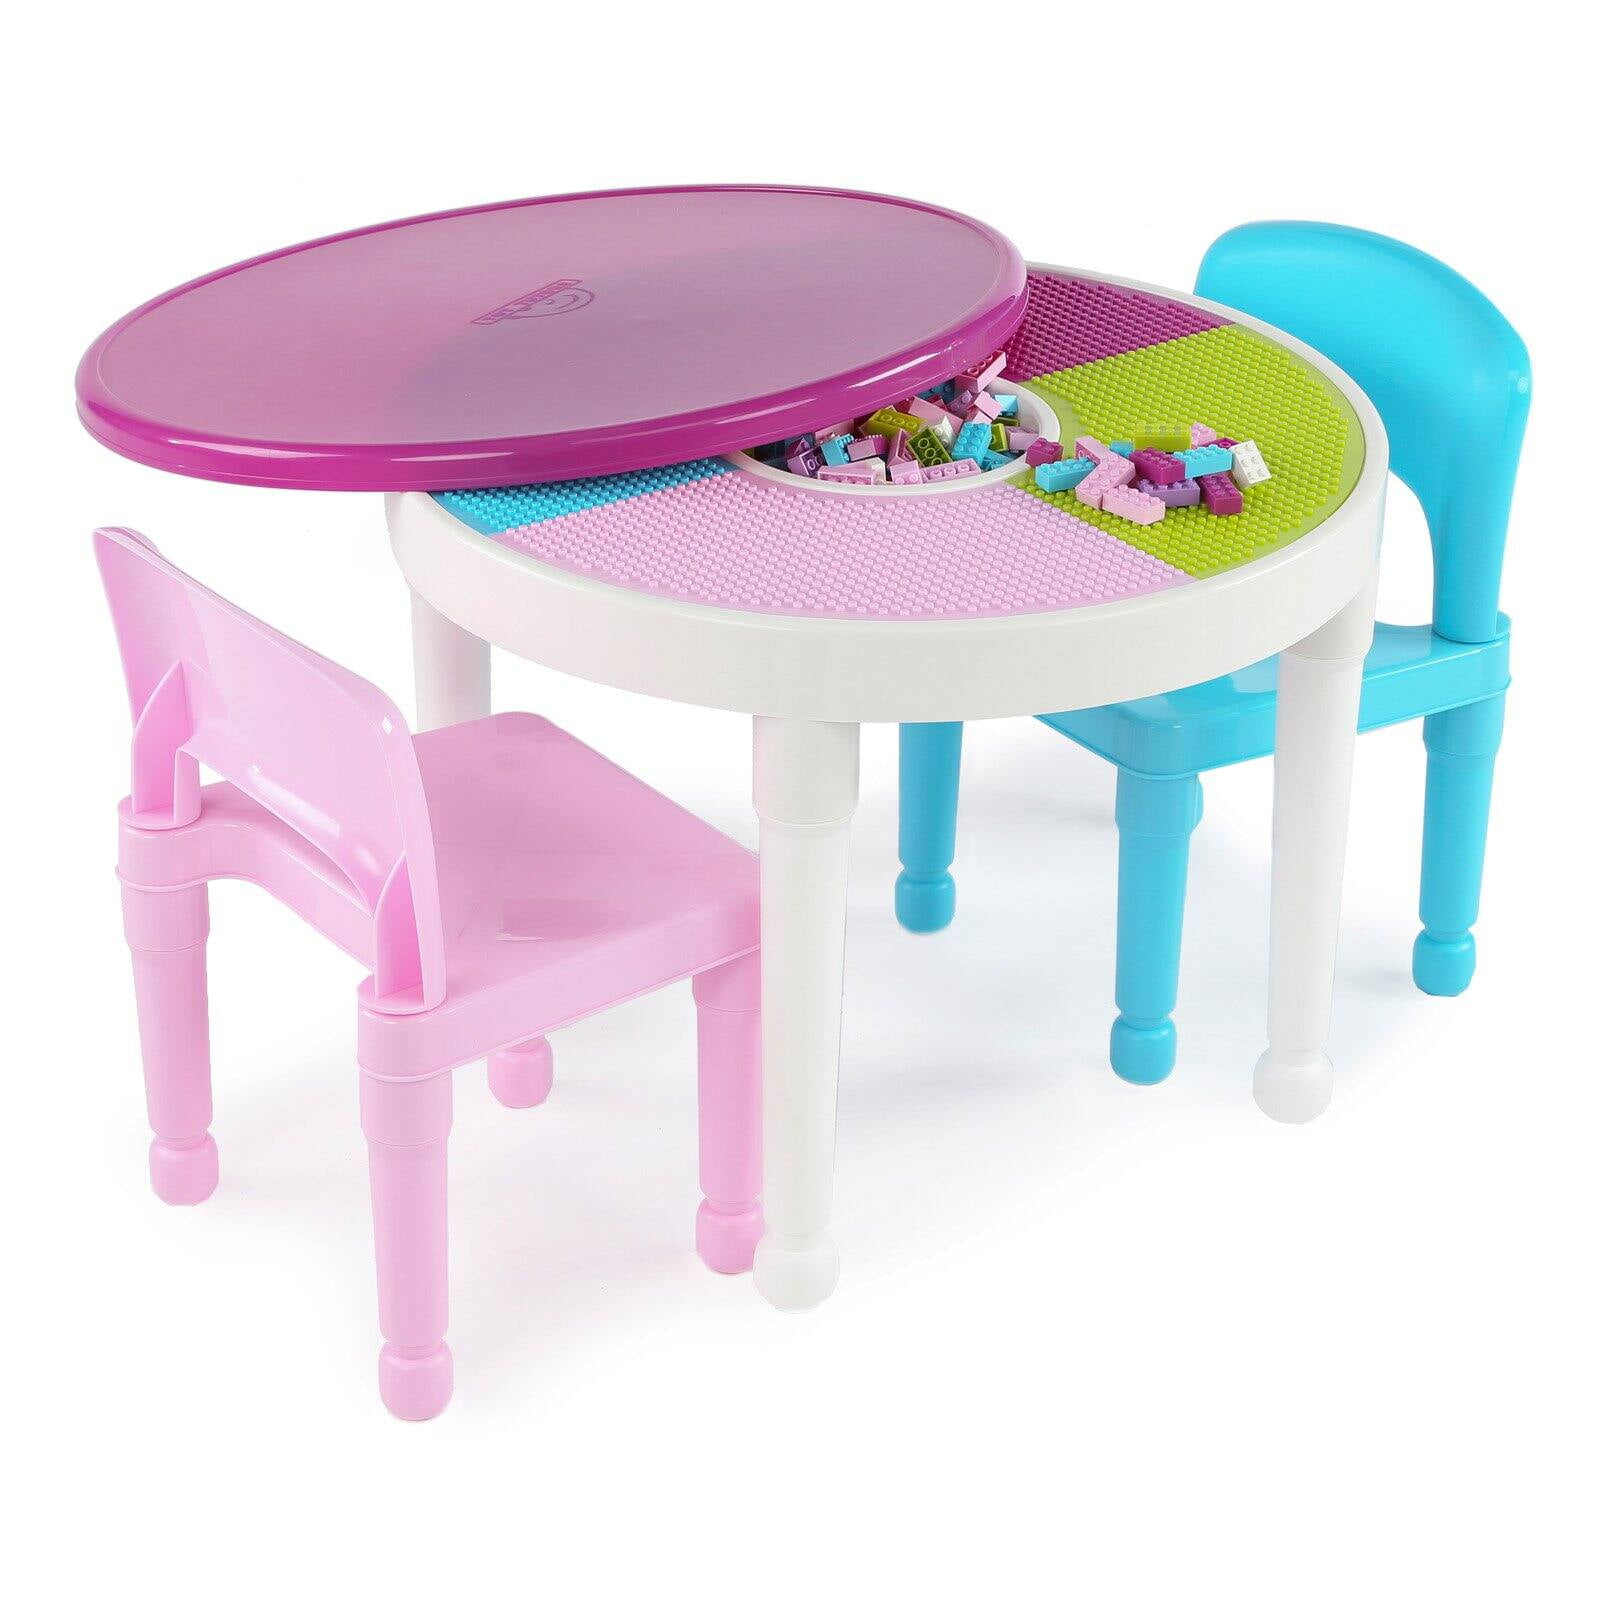 Humble Crew Kids 2-in-1 Plastic Activity Table and 2 Chairs Set, Round,  White, Blue & Pink, Ages 3 and Up